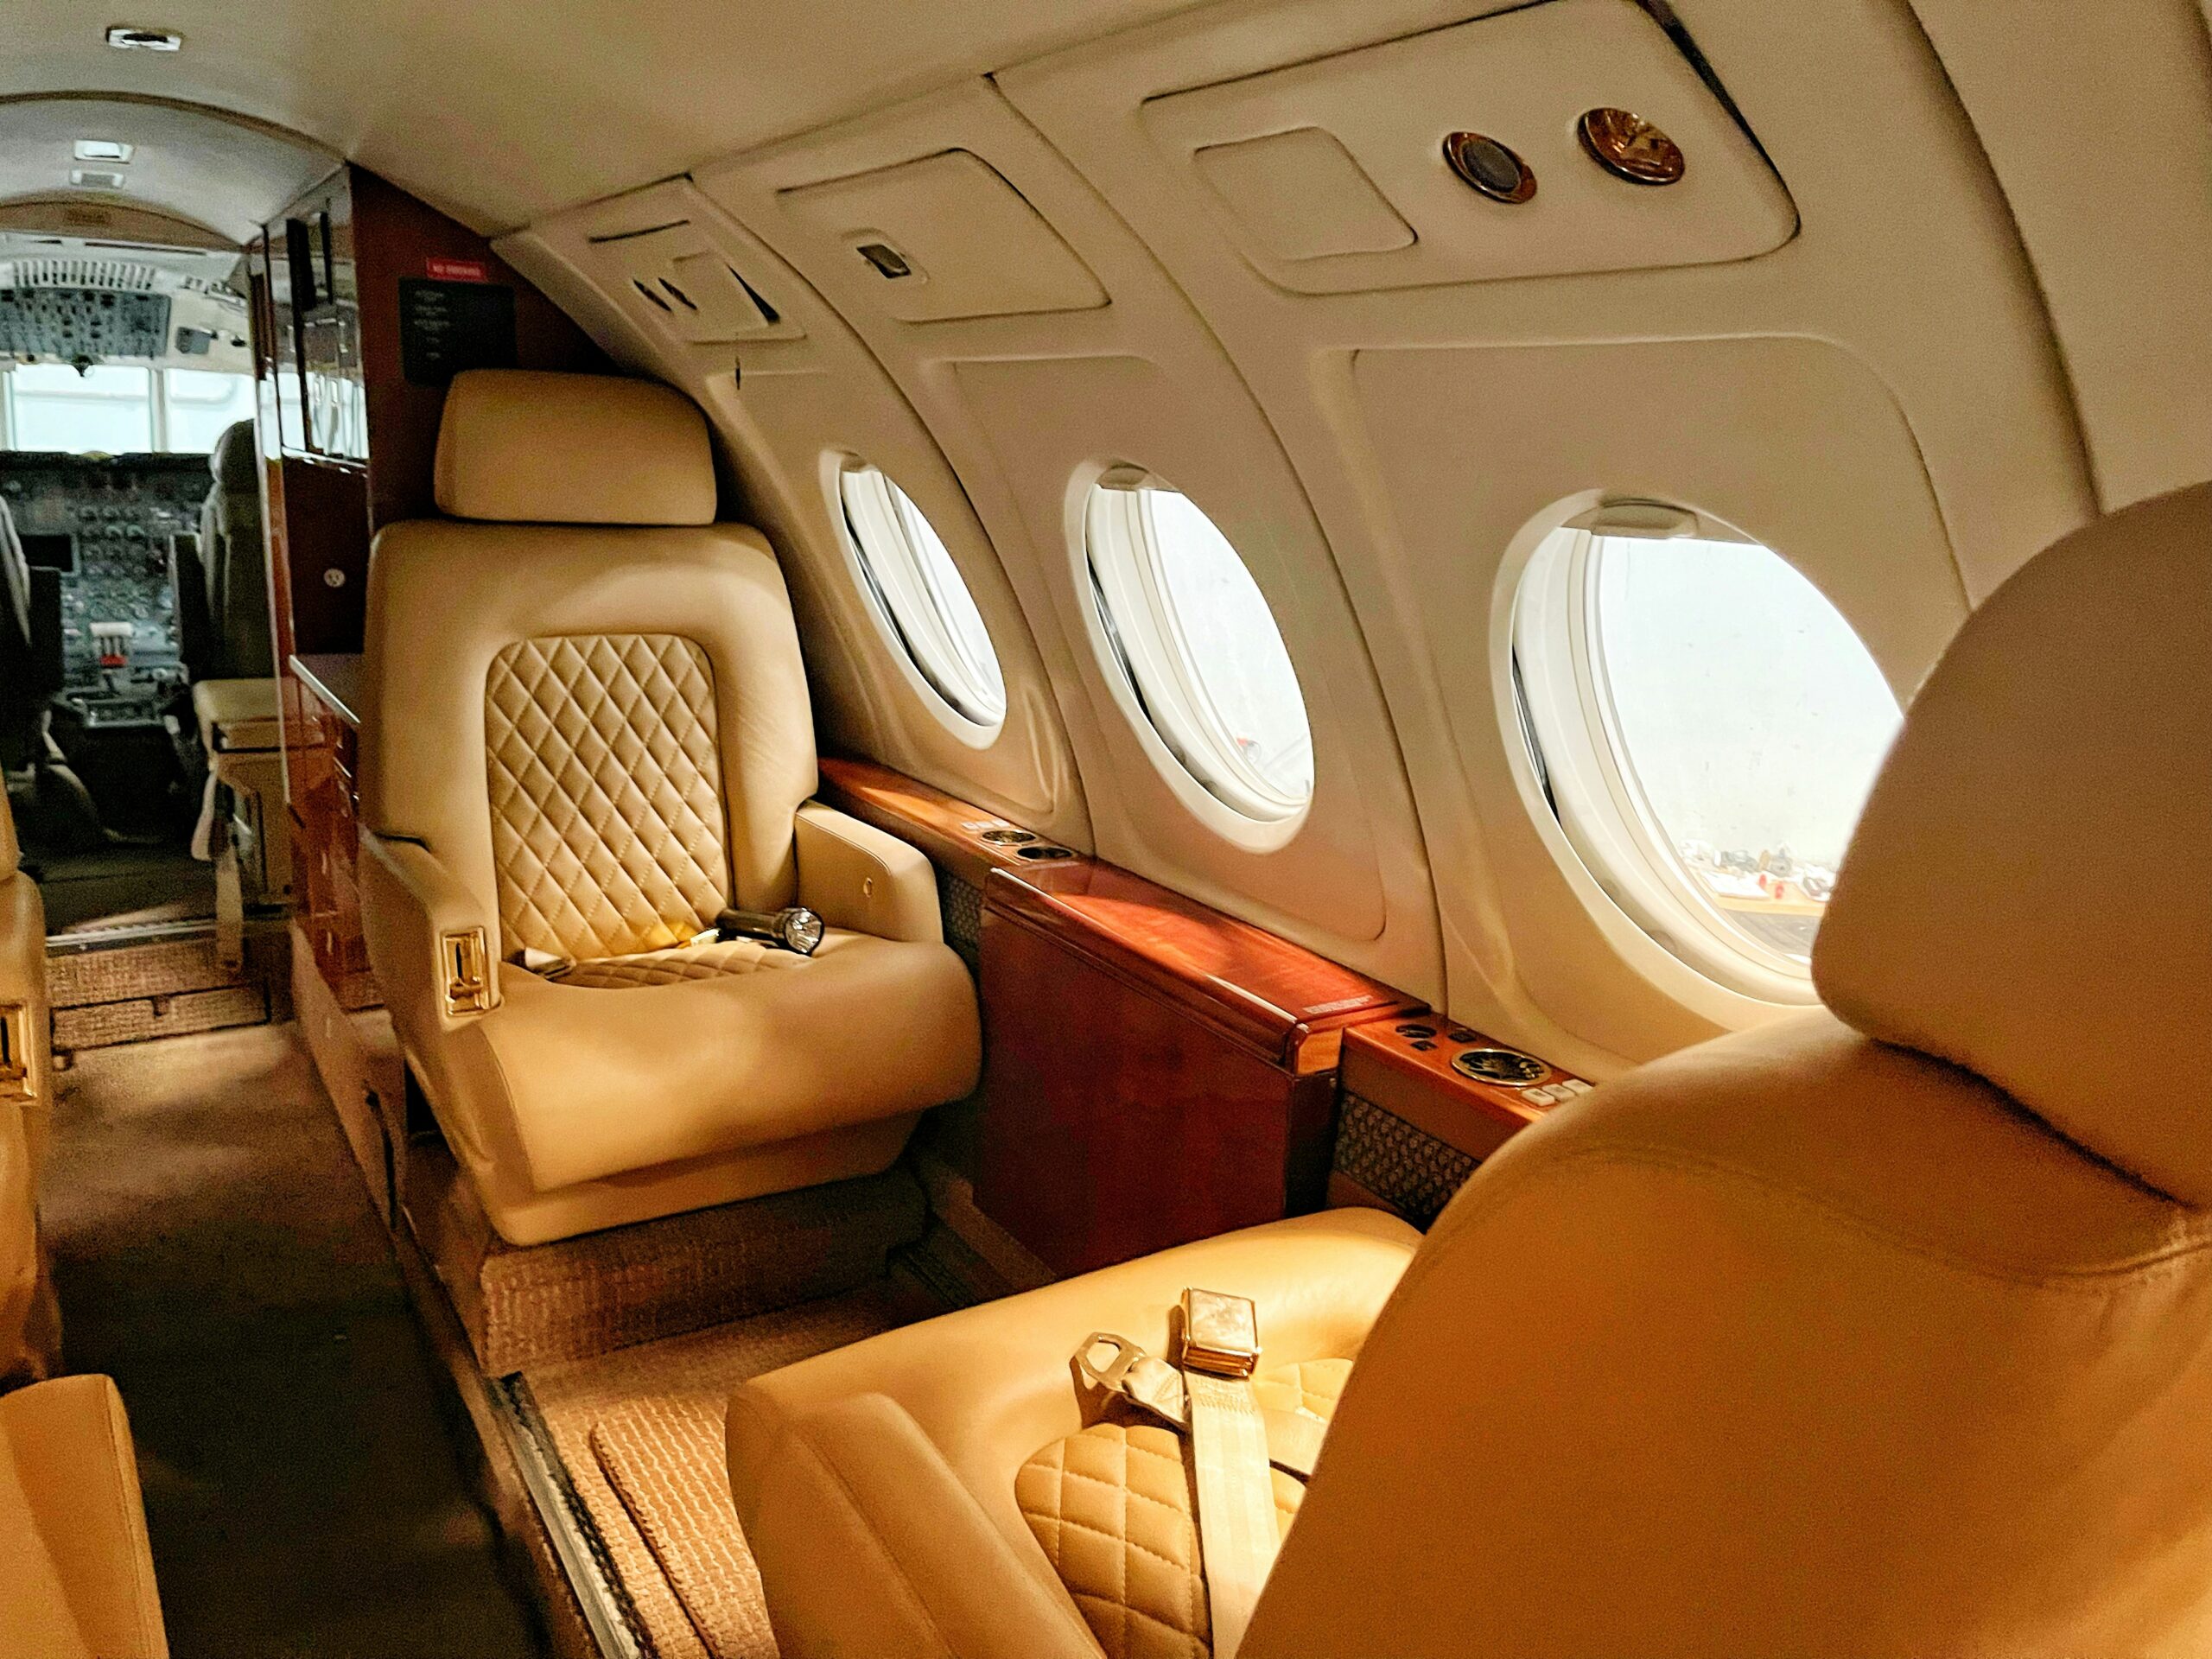 Sleek and opulent private jet interior showcasing comfortable seating and stylish cabin decor.